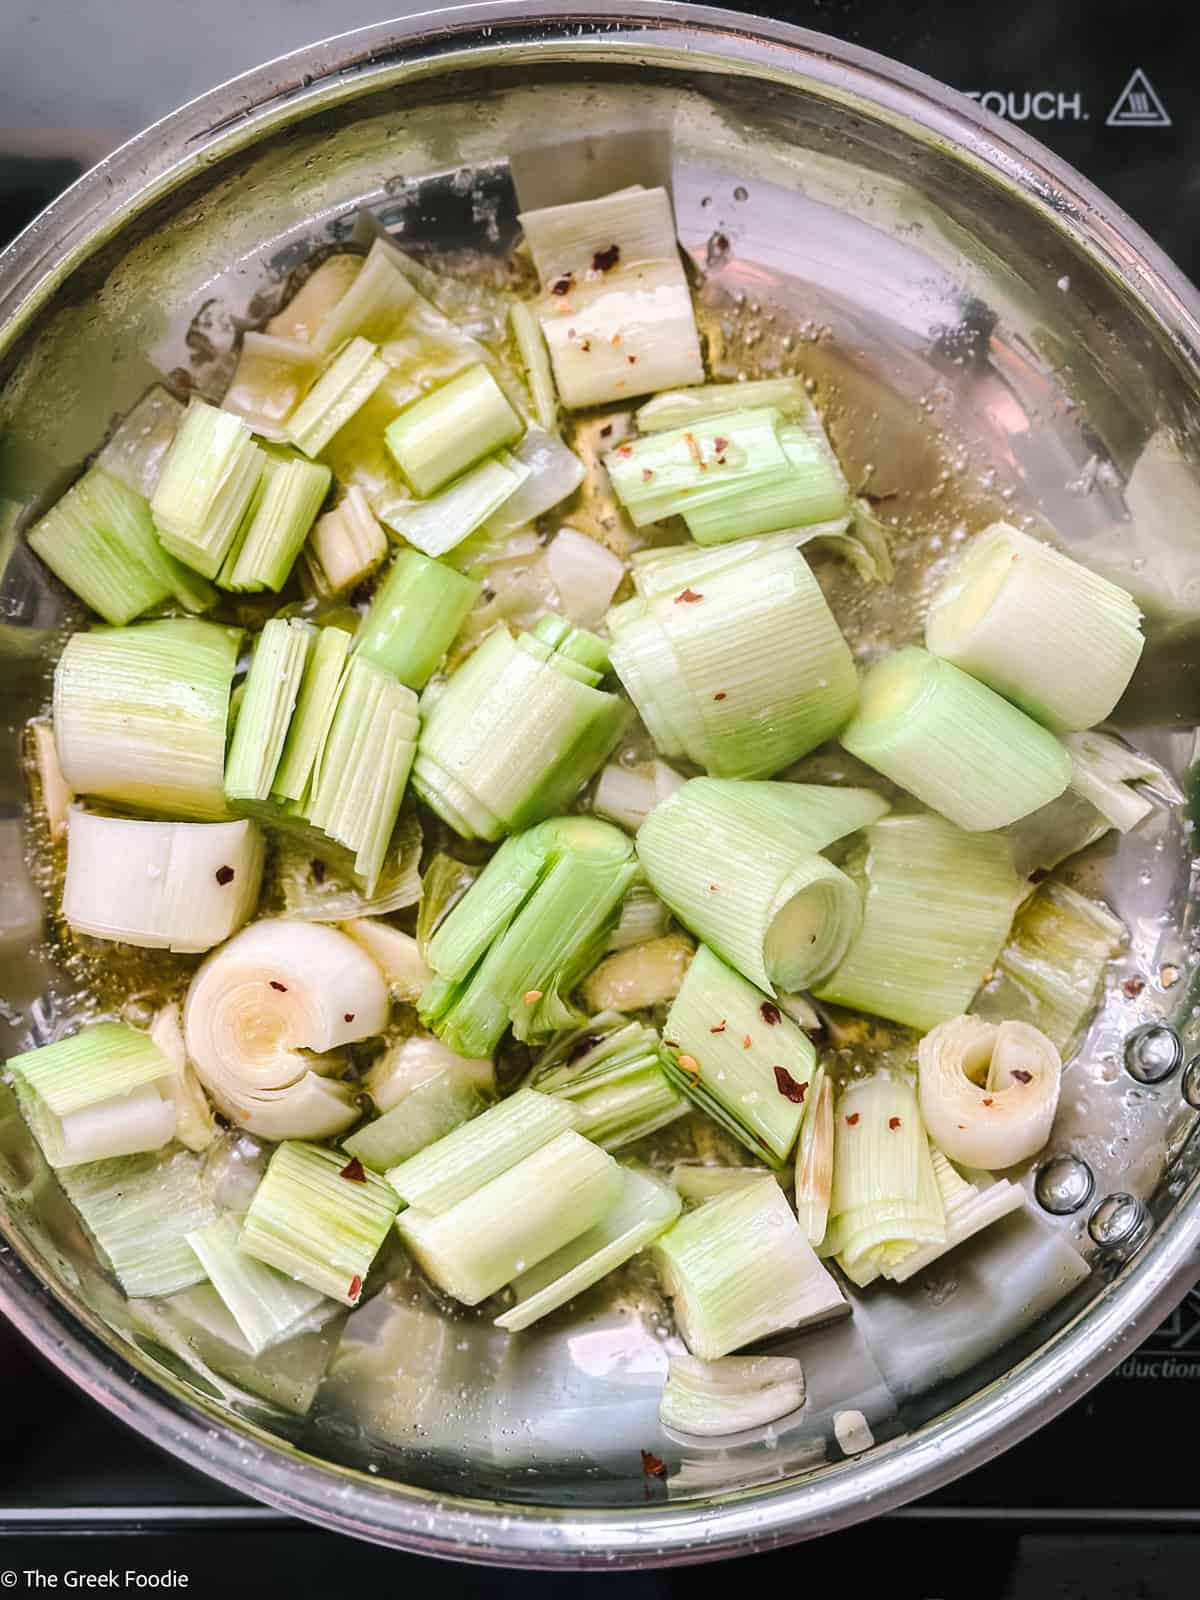 Roughly chopped leeks and garlic in a skillet with olive oil.